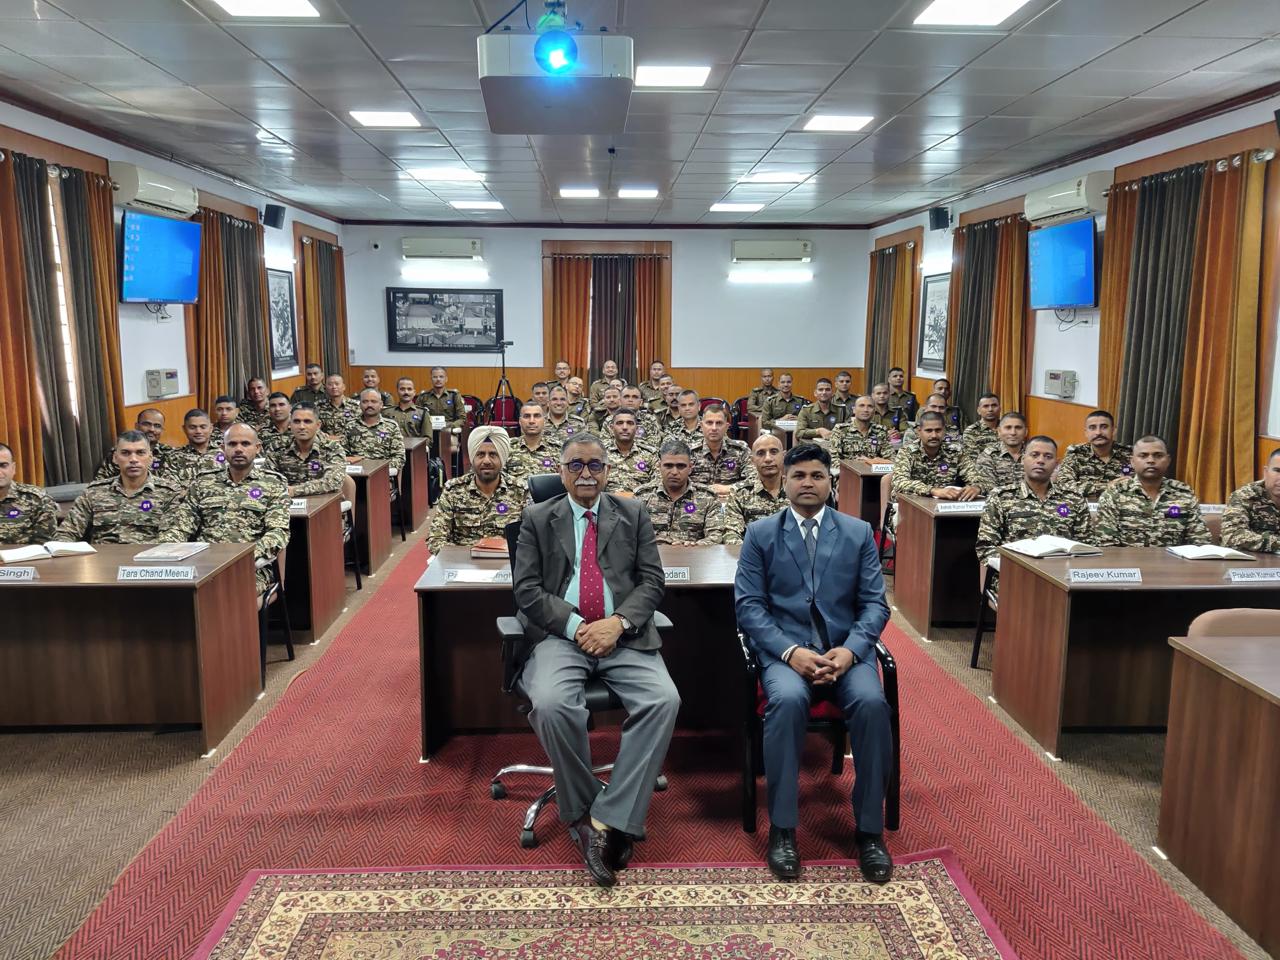 On March 6, 2024, a successful lecture on “Security scenario in India’s neighborhood” was given by Advisor NatStrat to the Senior CRPF officers at the Internal Security Academy, Mount Abu. He also explained to the audience about the work NatStrat has been doing.